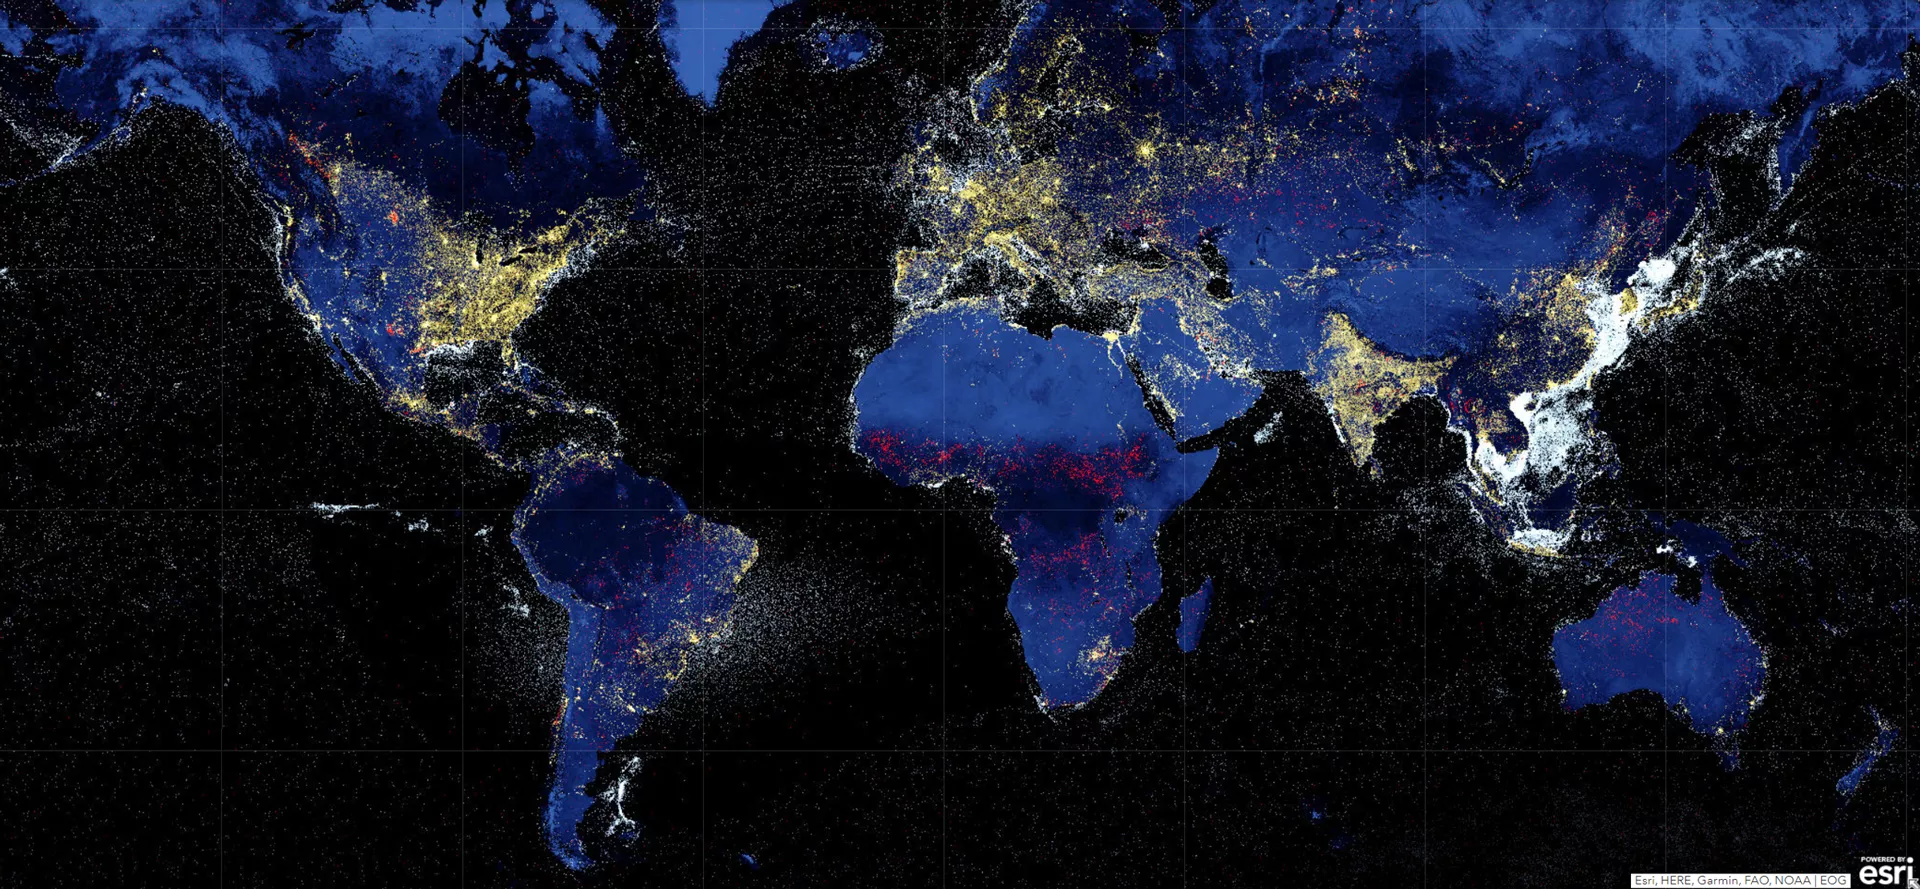 This image is a composite night-time view of the Earth from space, showing various sources of light. The continents are outlined with the lights of cities and towns, and the vast darkness of the oceans contrasts with the illuminated areas. Red dots indicate natural gas flares, gold dots indicate artificial light, and white dots indicate boat detections.